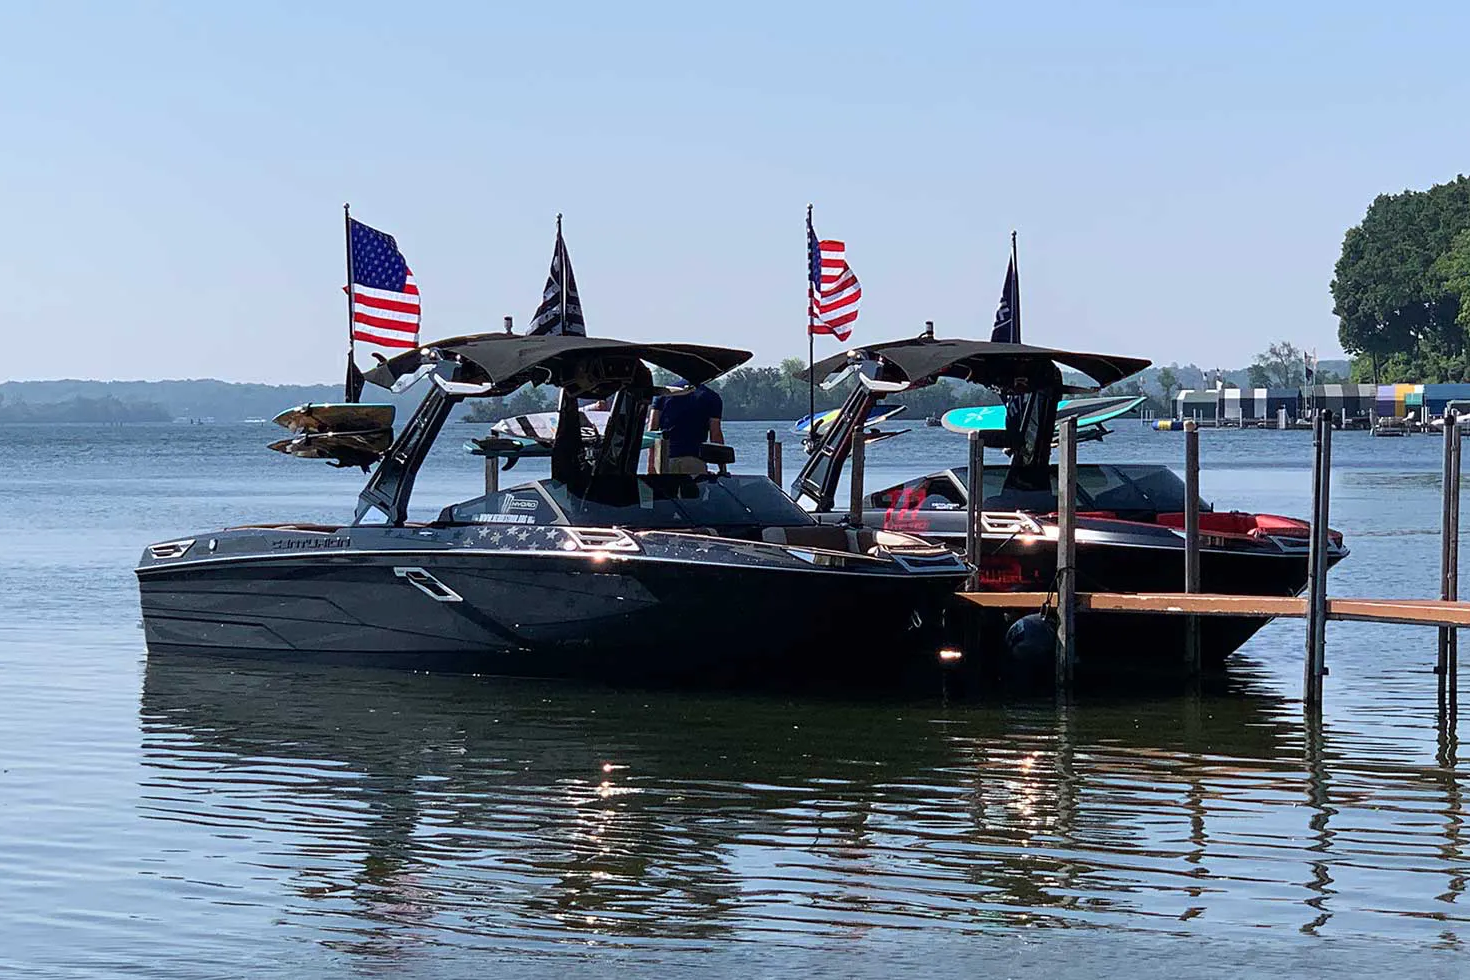 Two wakesurf boats docked at a dock with American flags.